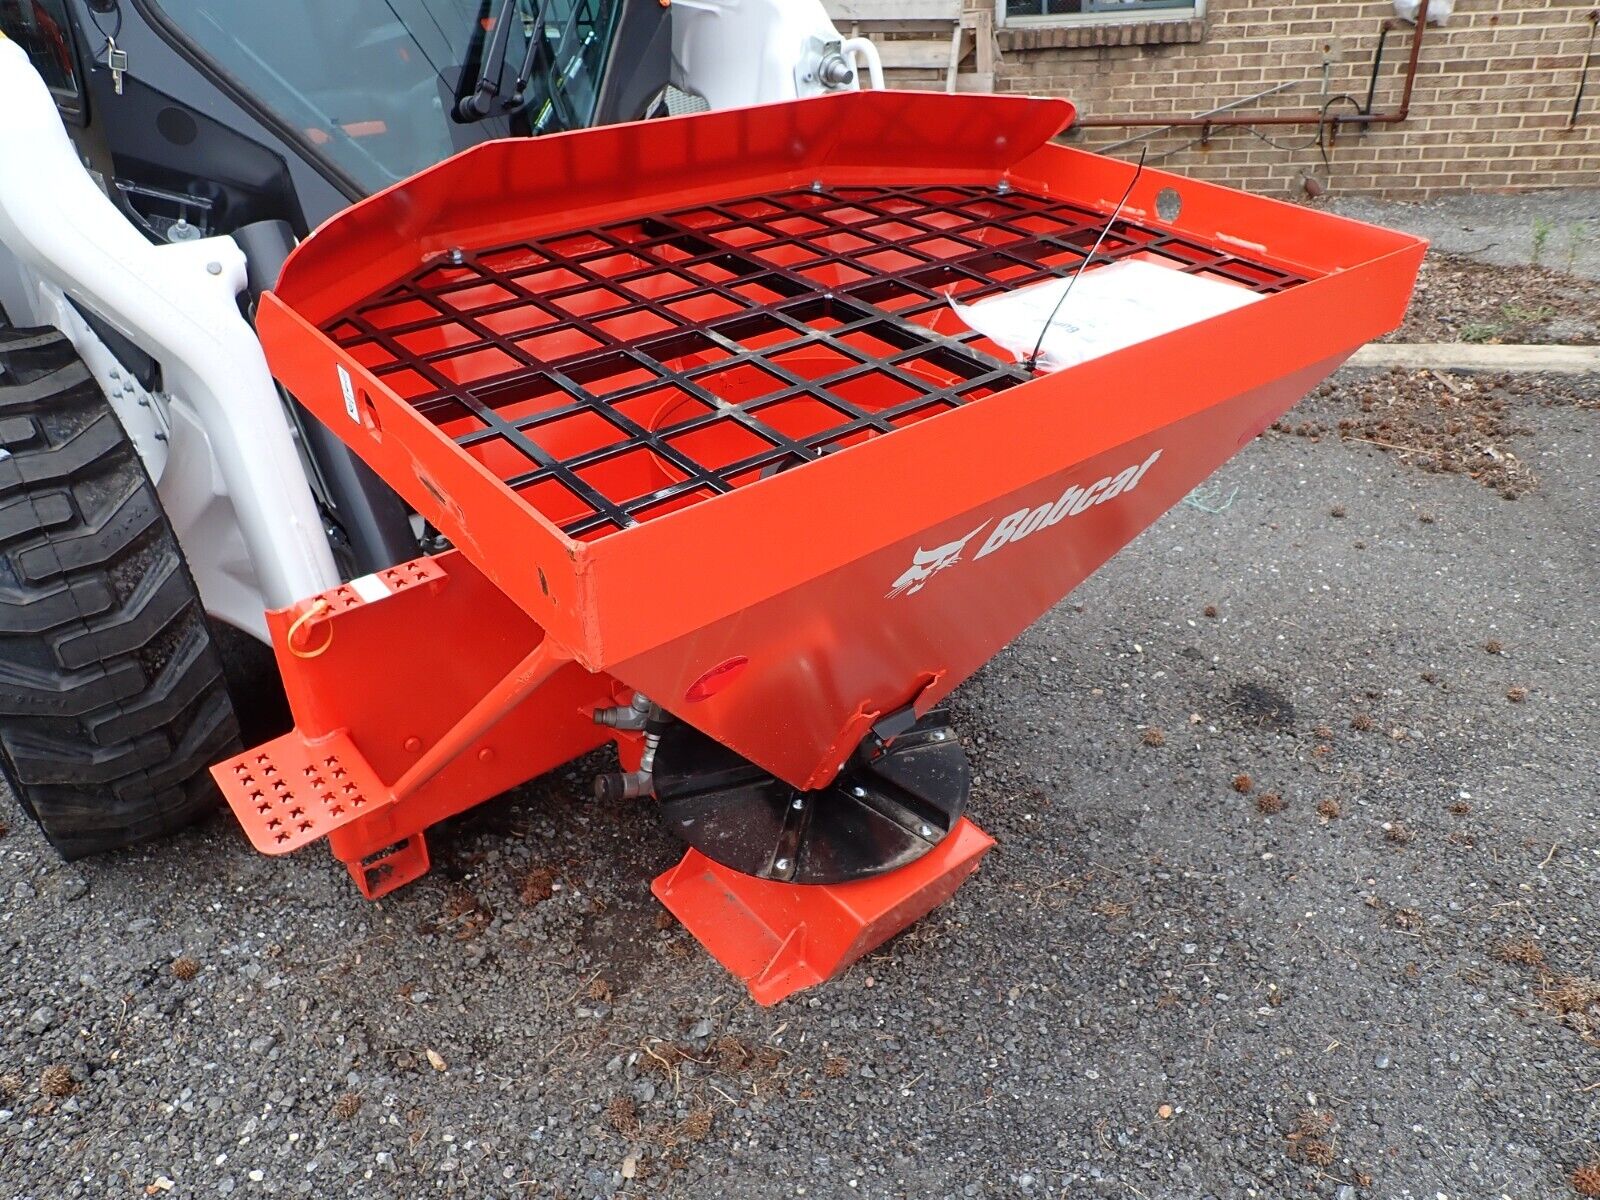 New Bobcat Hs8 Hydraulic Spreader Attachment For Skid Steers, Ssl Quick Attach